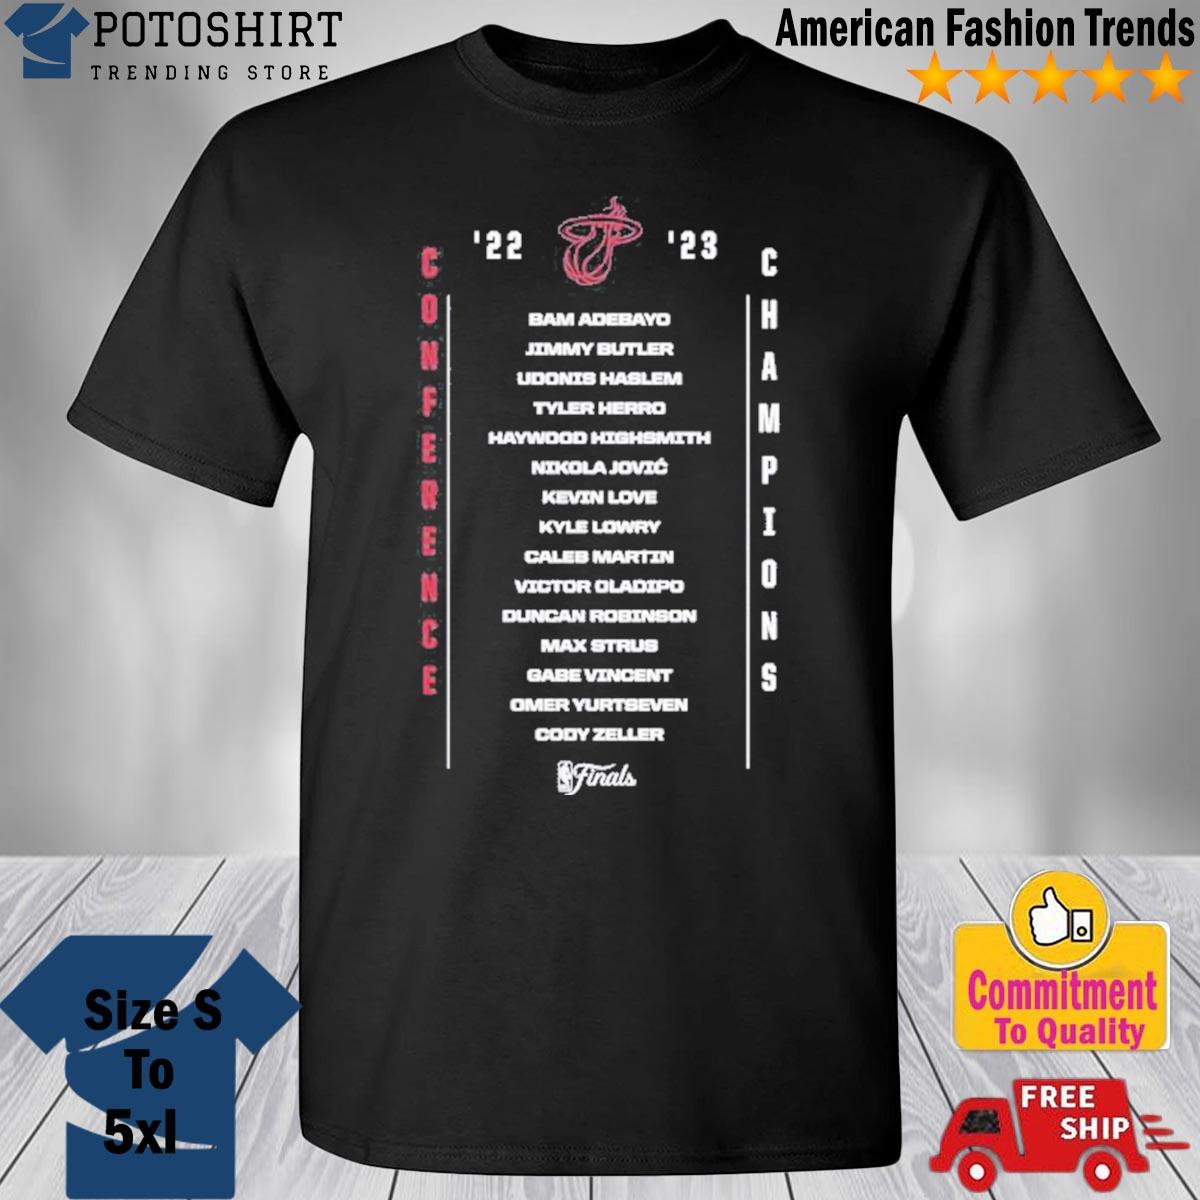 TEAM ROSTER FOR THE BACK OF T-SHIRT